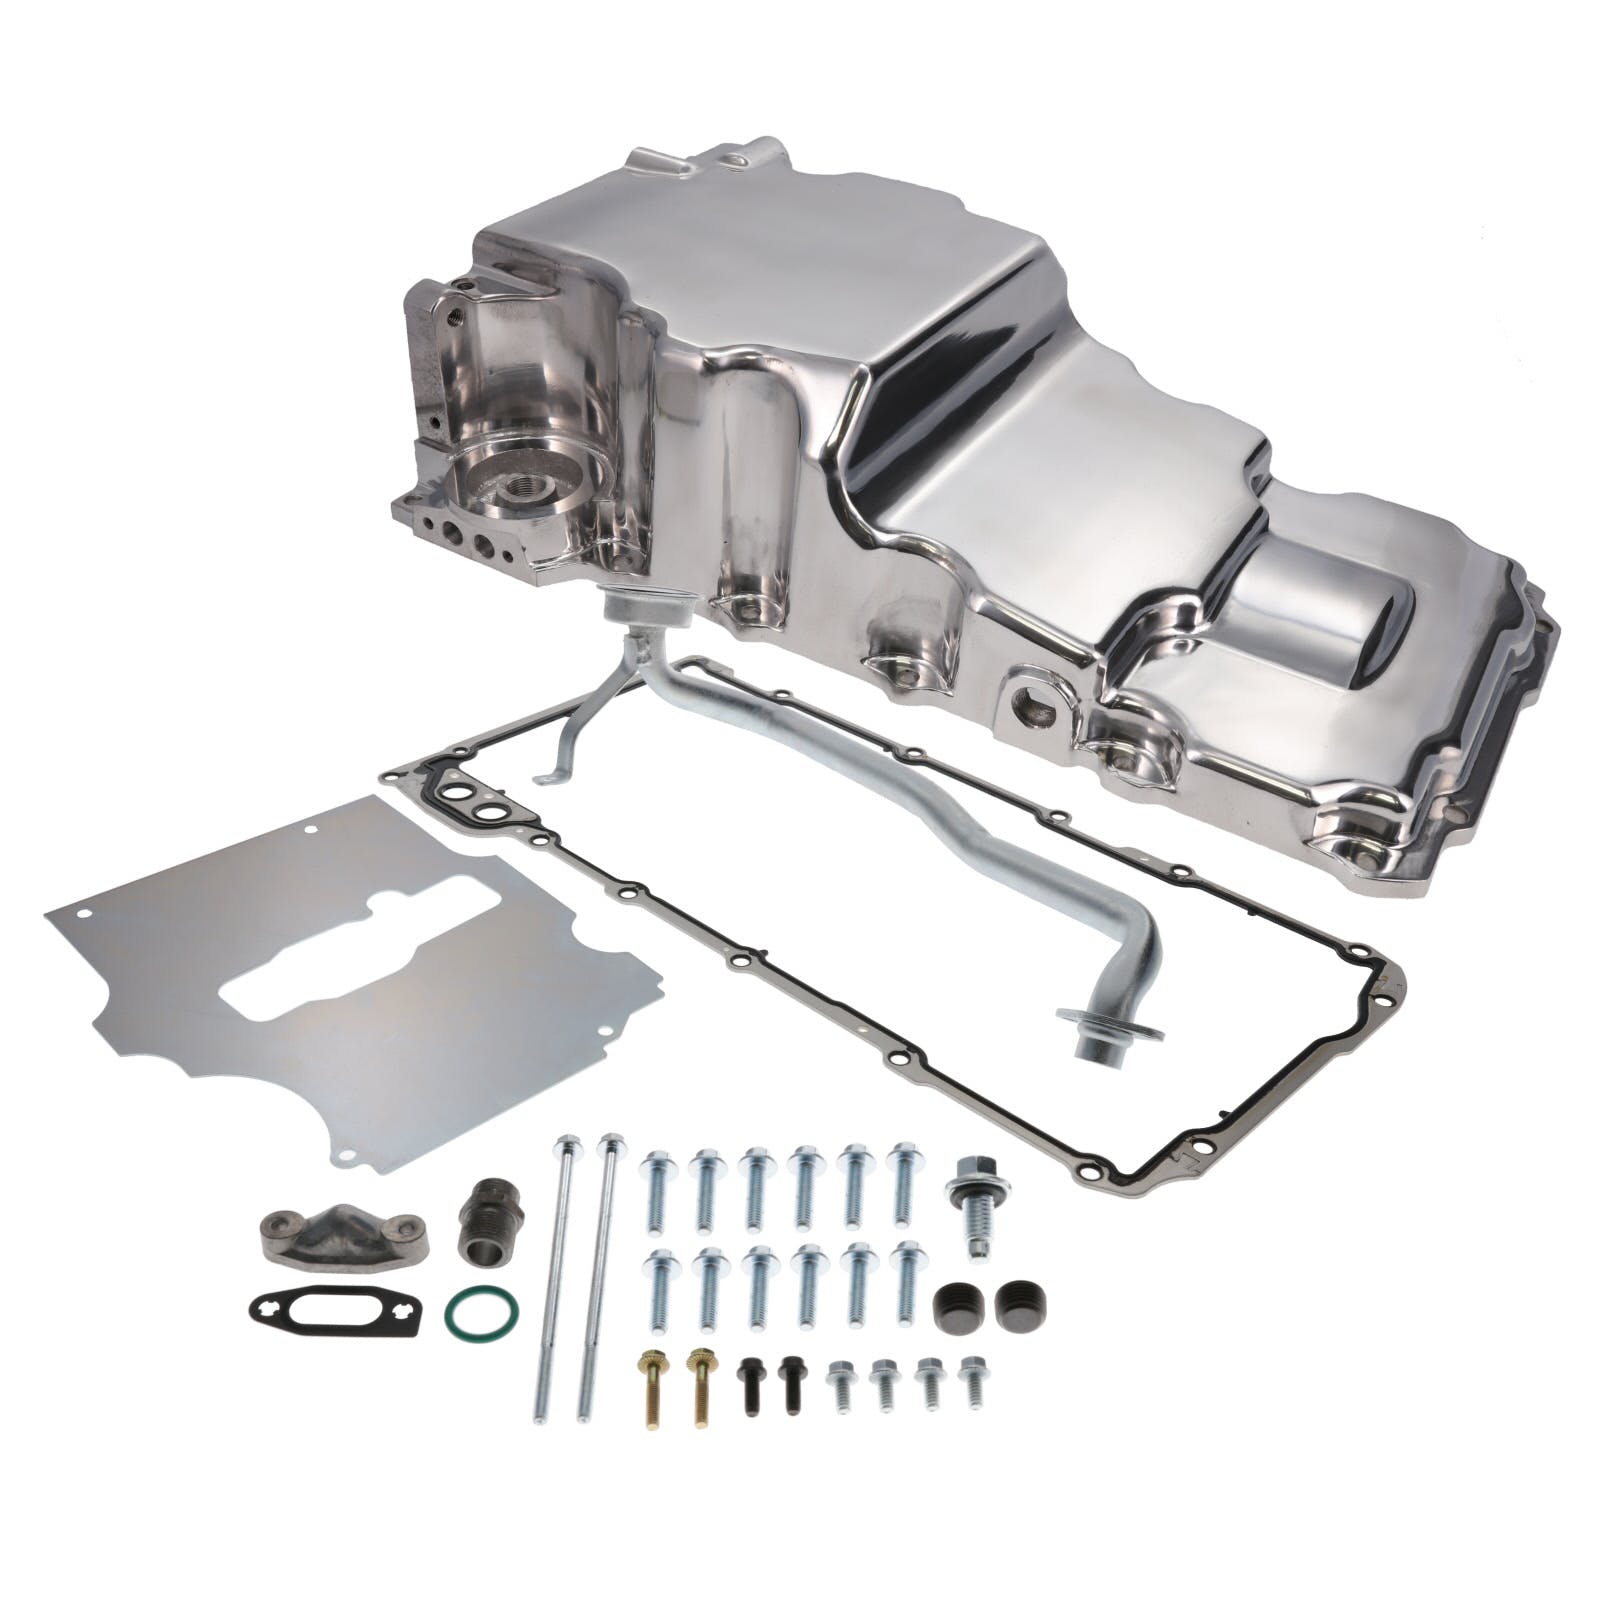 Top Street Performance 81075P LSX Low Profile Retro Fit Oil Pan with 1/2 NPT Port, Polished